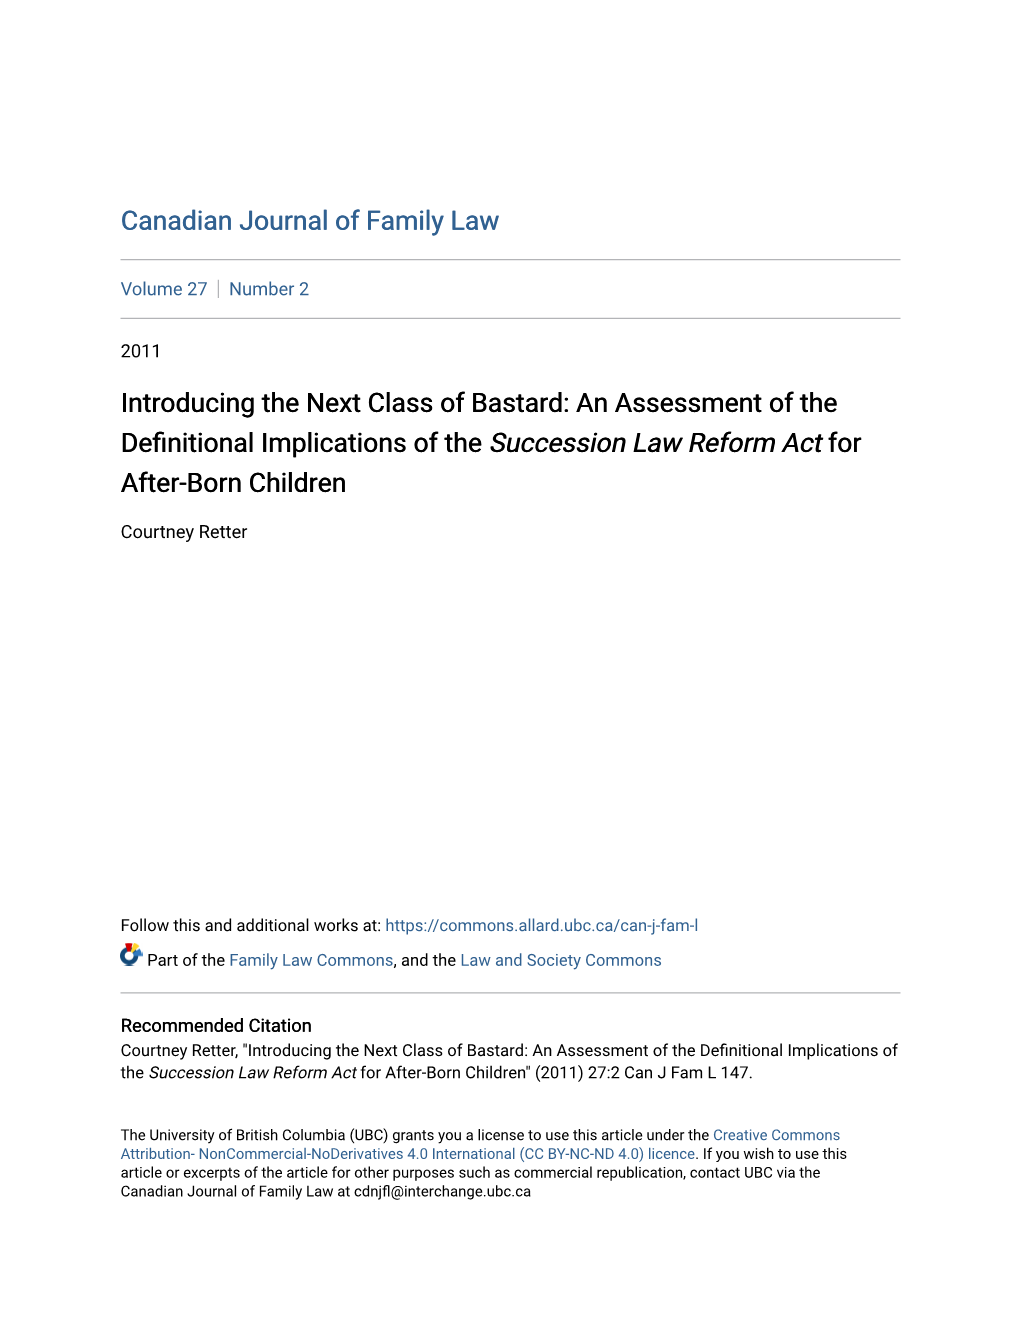 Introducing the Next Class of Bastard: an Assessment of the Definitional Implications of the Succession Law Reform Act for After-Born Children